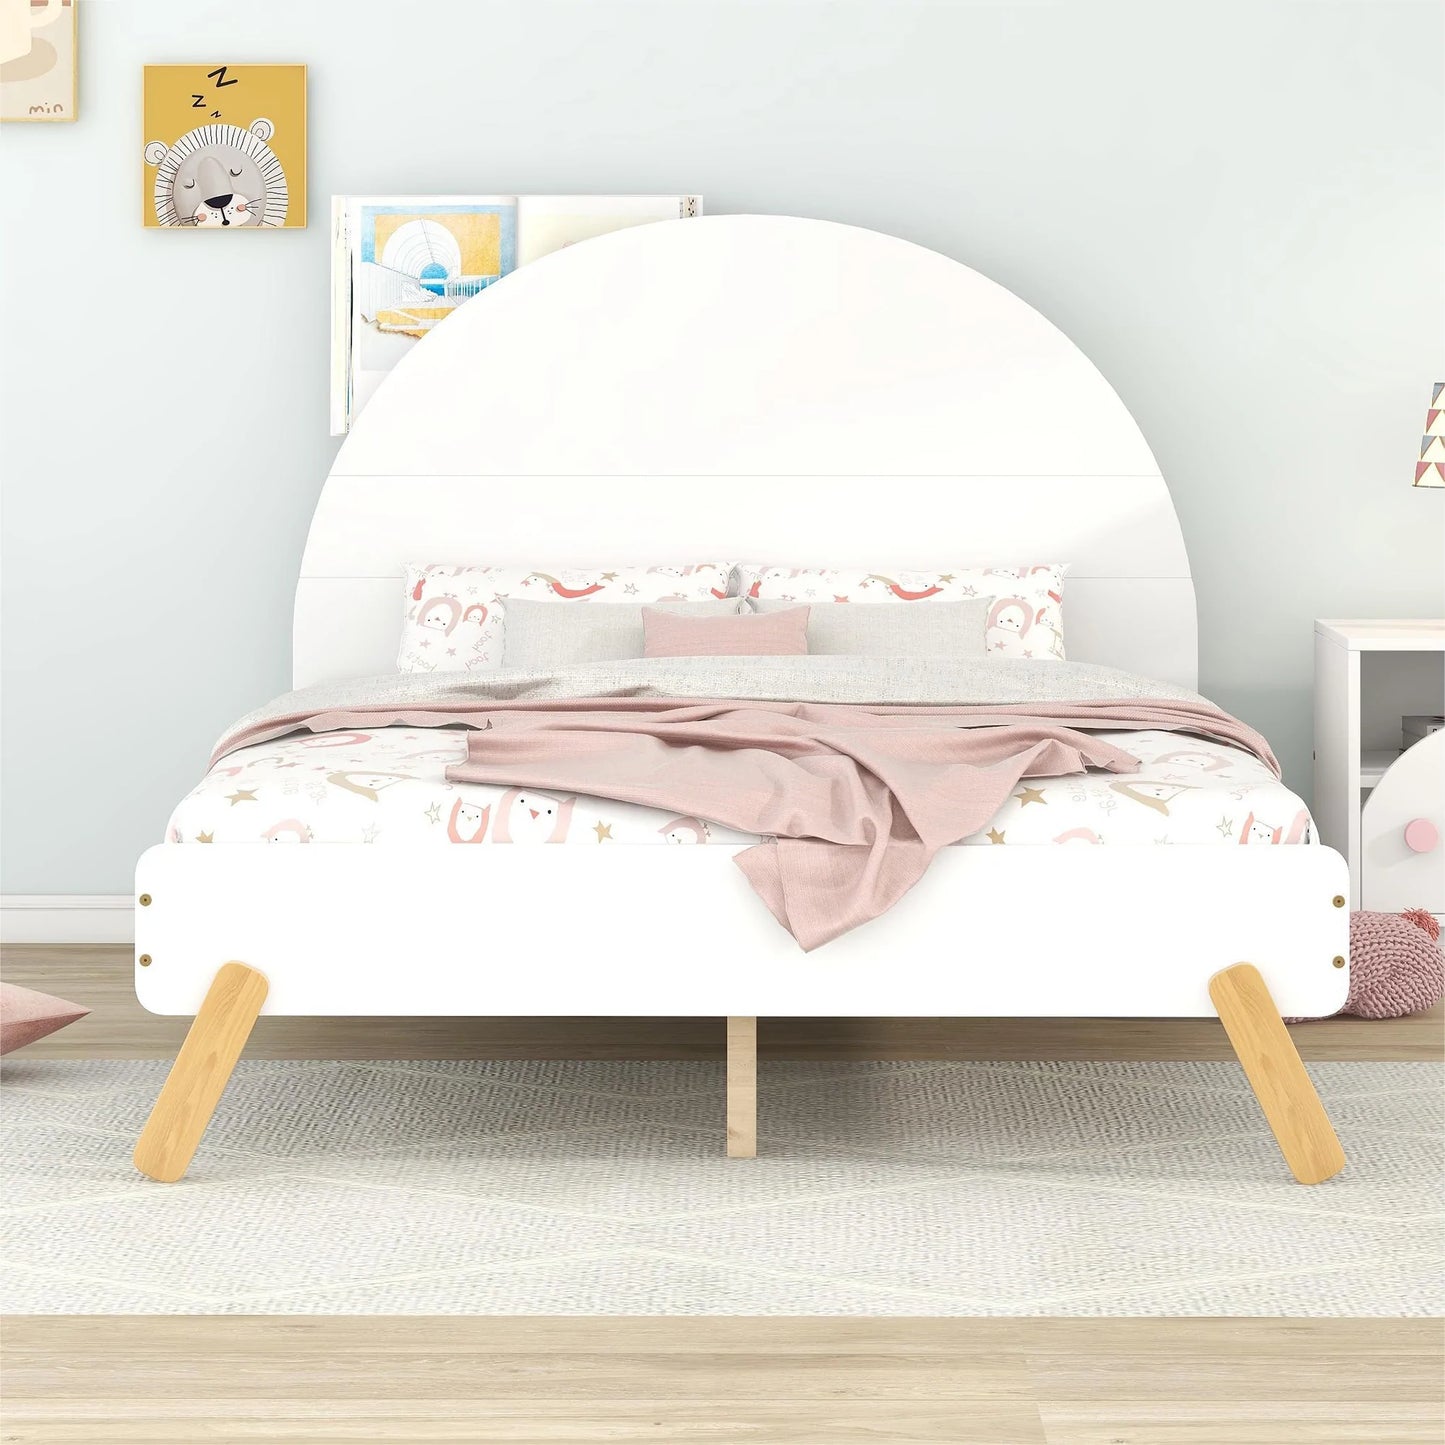 Wooden Bed With Shelf Behind Headboard Full Size in White